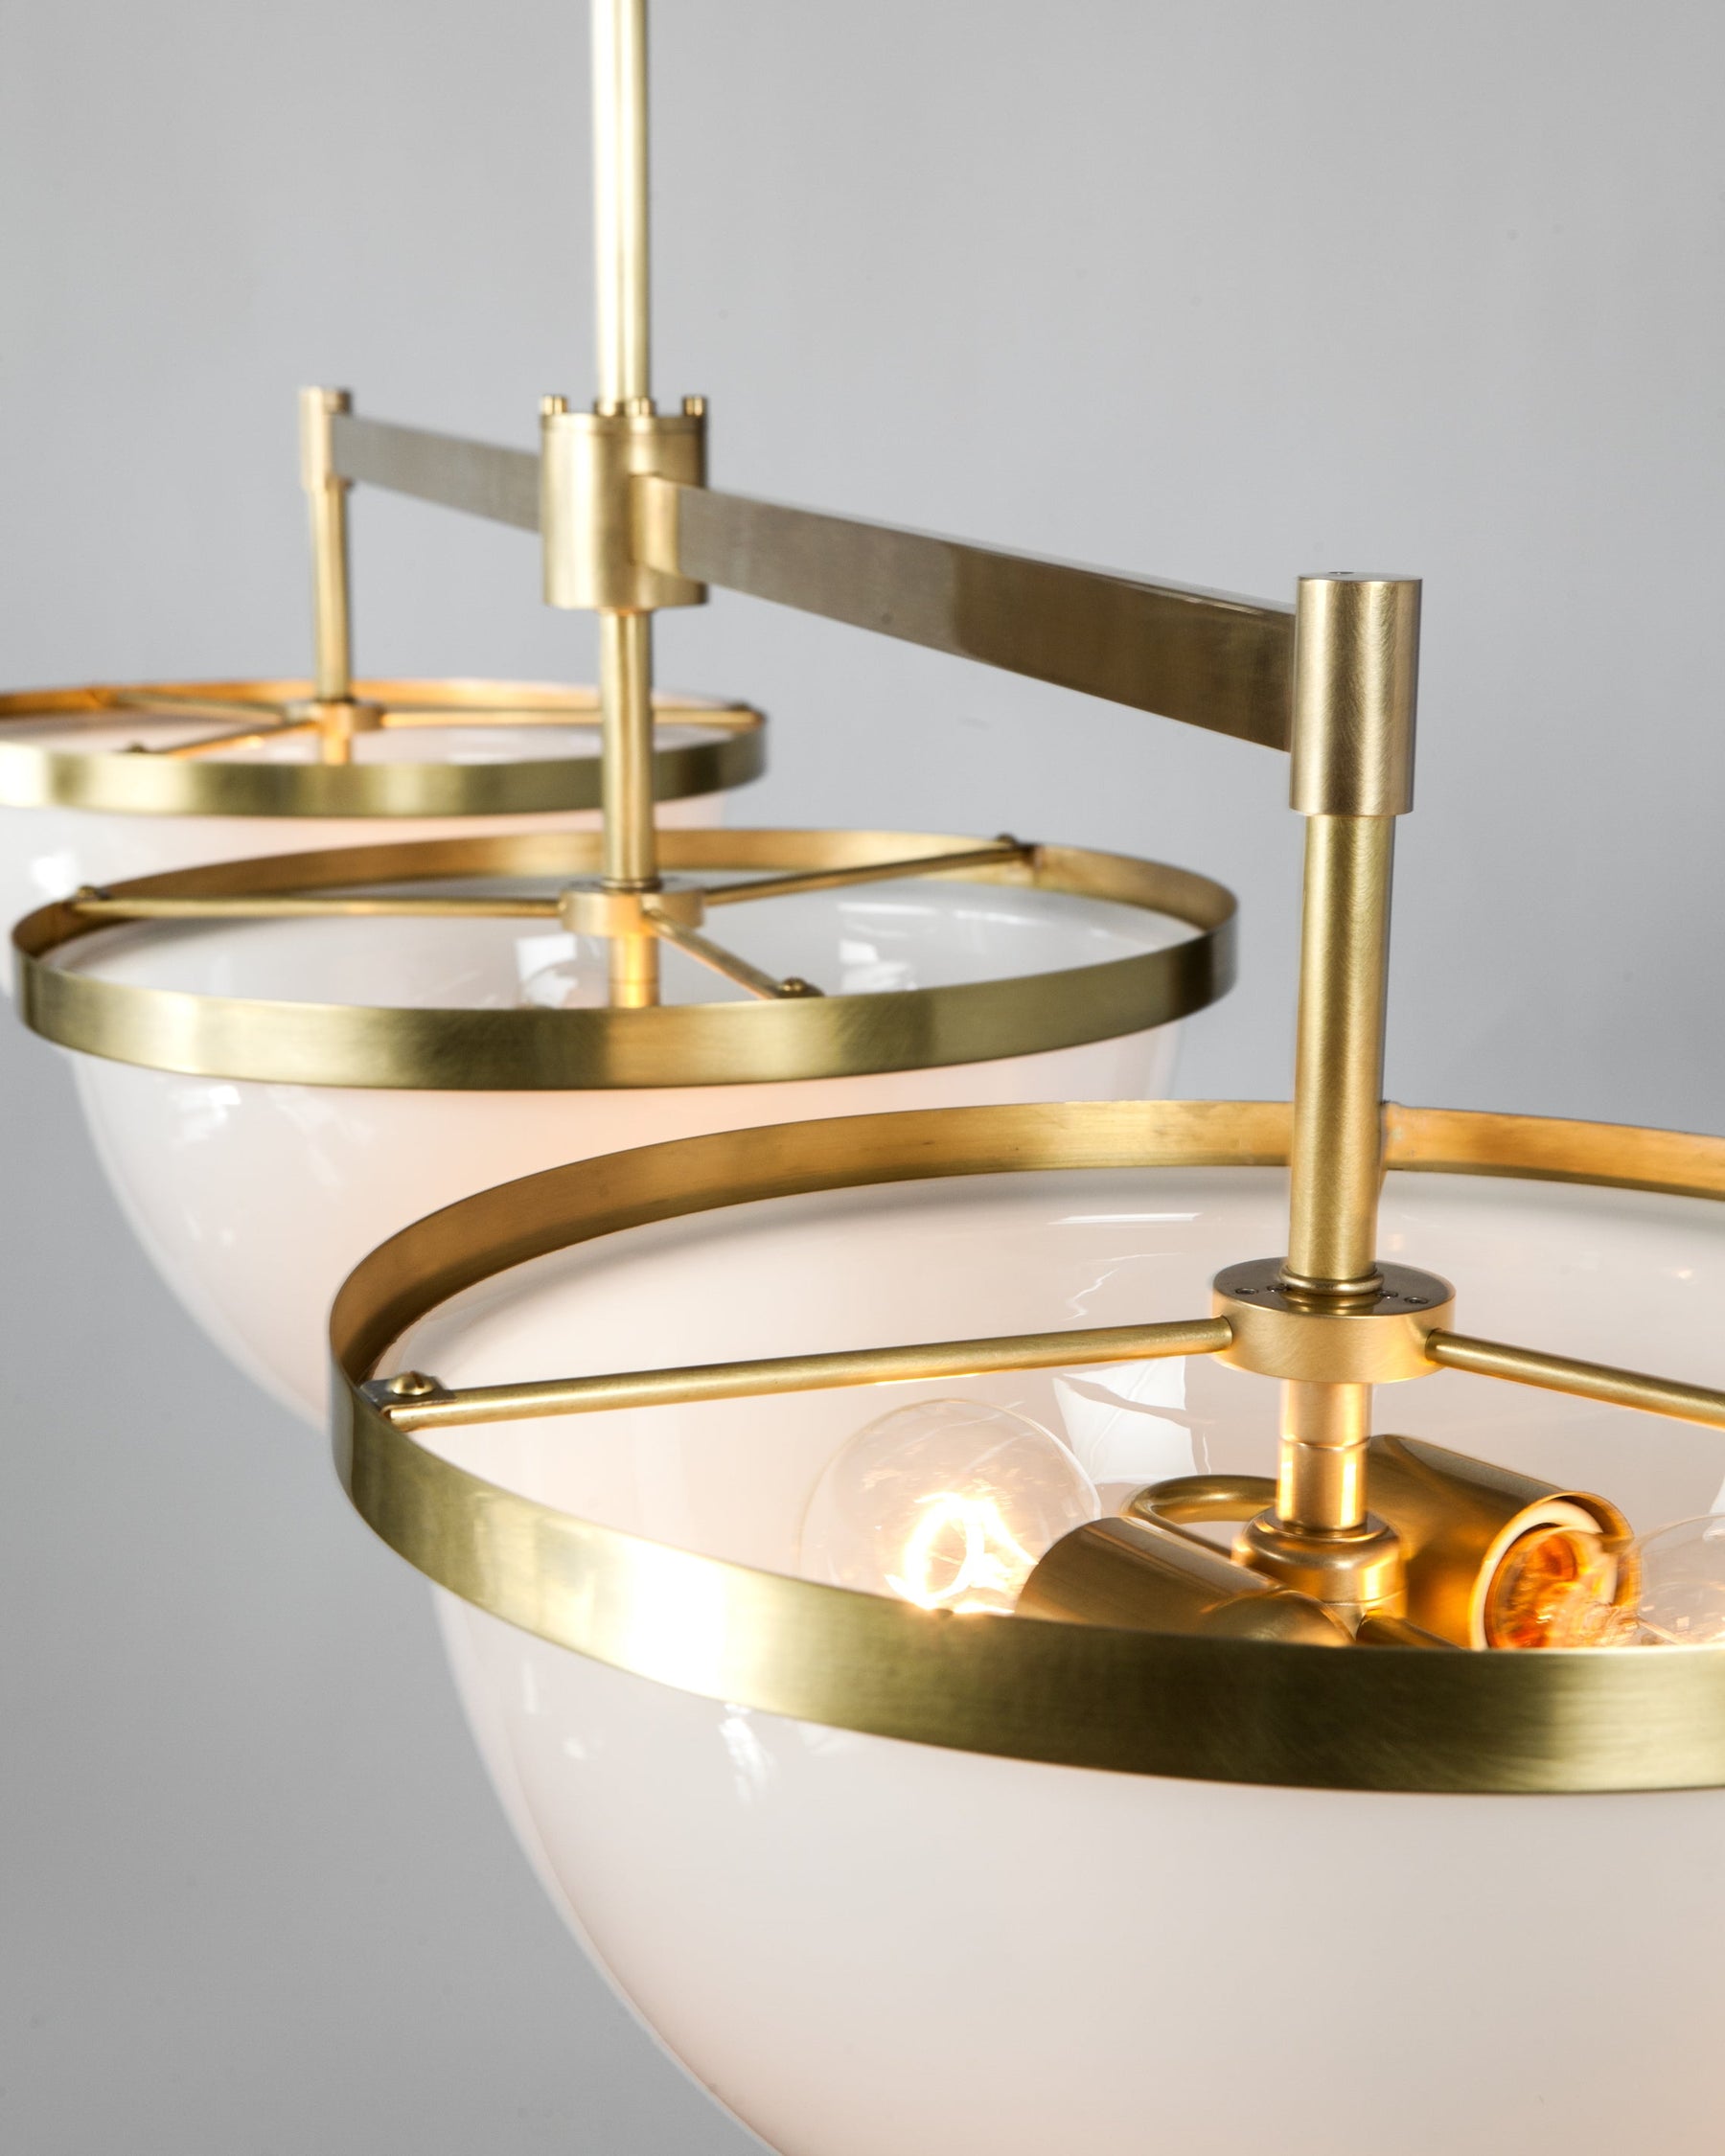 The modern brass Nevins three light billiard light viewed from above, showing the details of the rims that hold the milk glass shades and three spokes that attach the rim to the body of the fixture. The fixture is designed by Alan Wanzenberg for Remains Lighting Co.